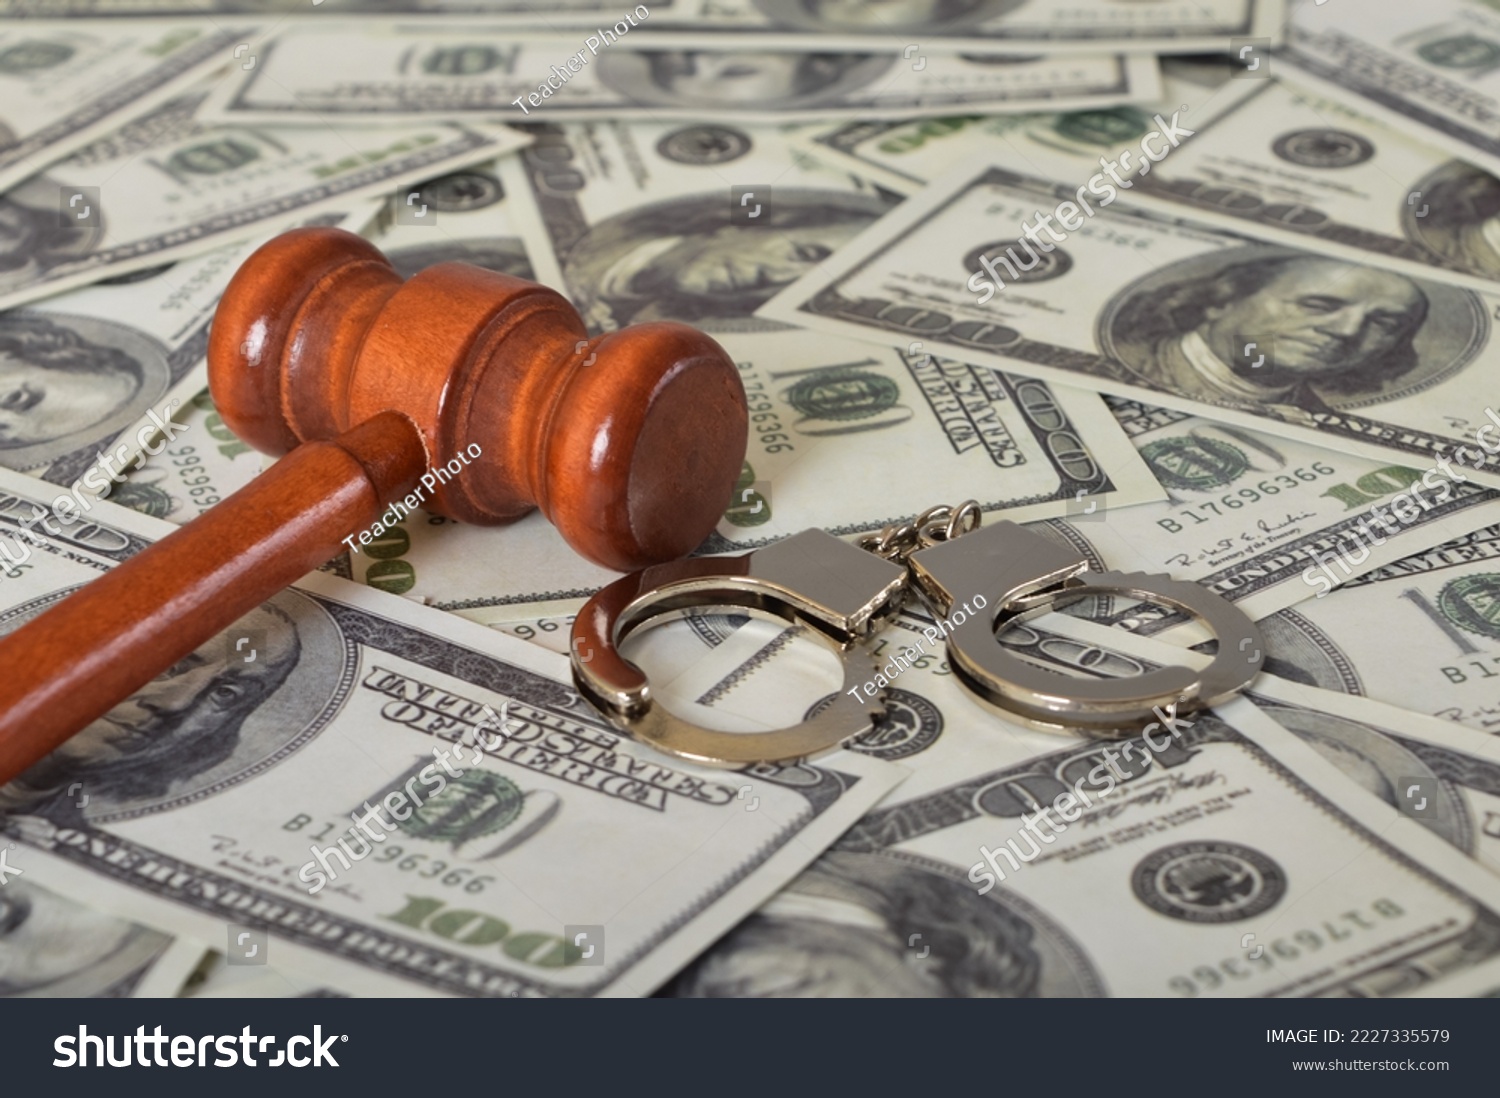 Judge gavel, handcuffs and money banknotes. Economic crime, scam, bail and corruption concept. #2227335579